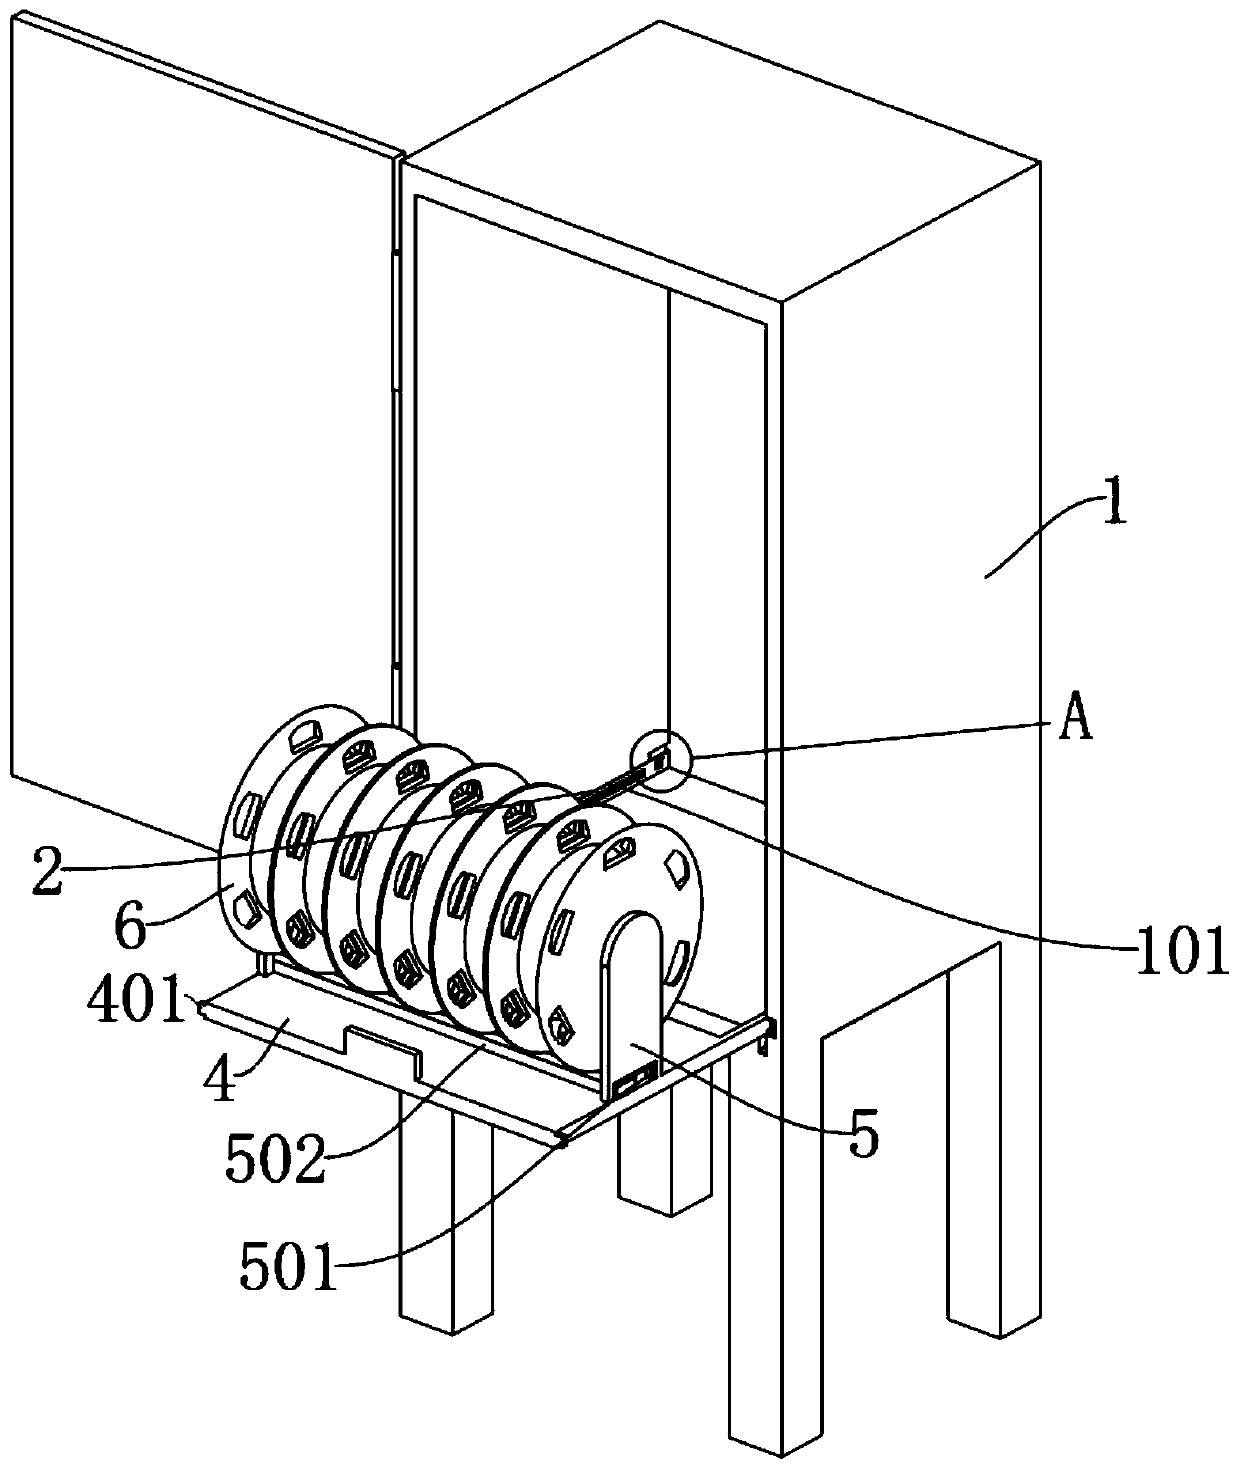 Detachable winding device used in power distribution cabinet